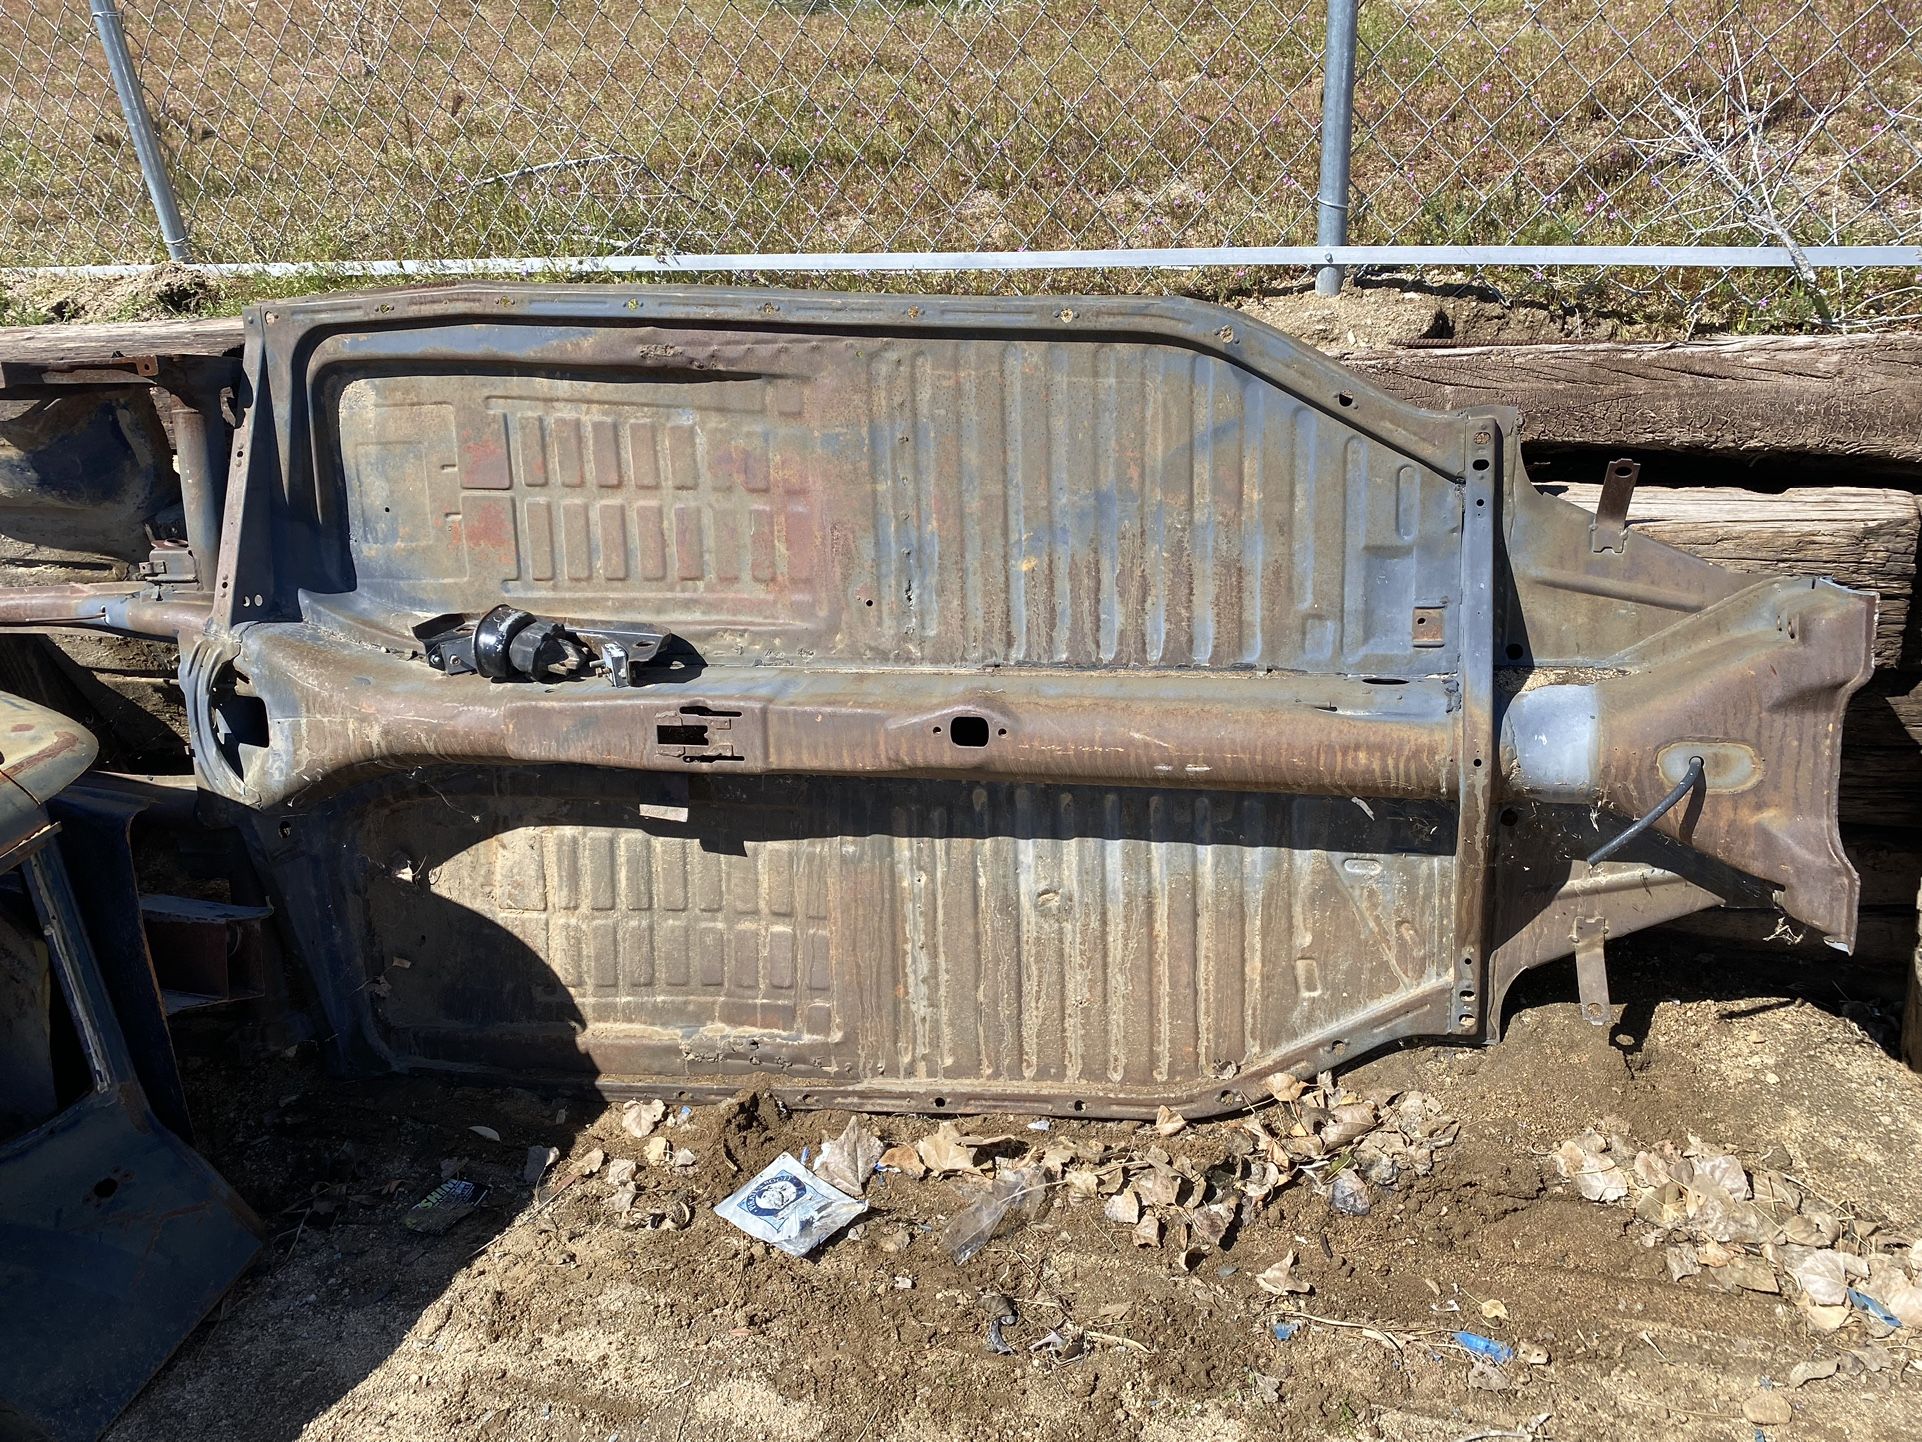 68 Vw Pan, Body And Extras